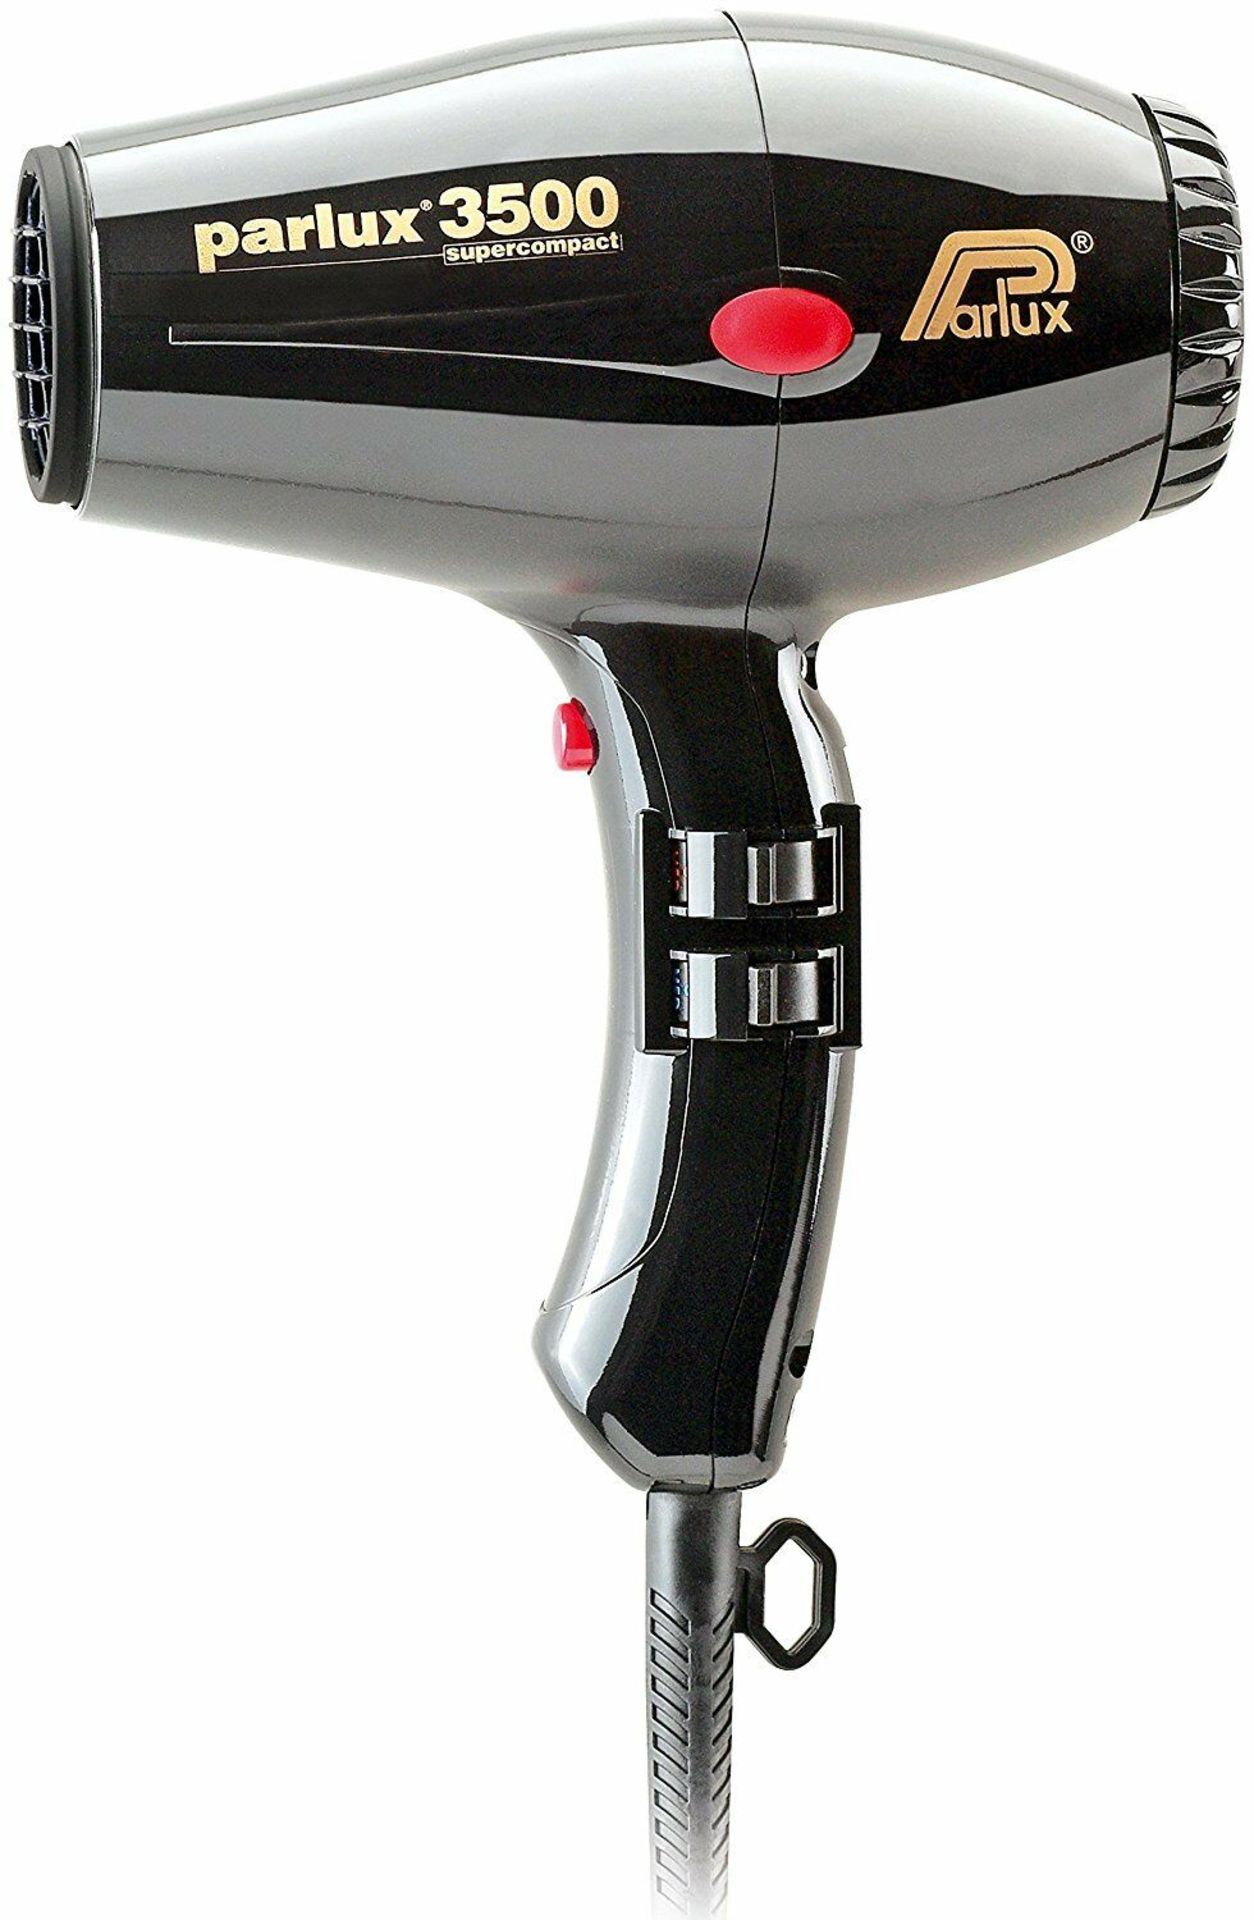 Parlux 3500 Supercompact Professional Hairdryer RRP £249 - Ex Demo or Surplus Stock from Private... - Image 3 of 11